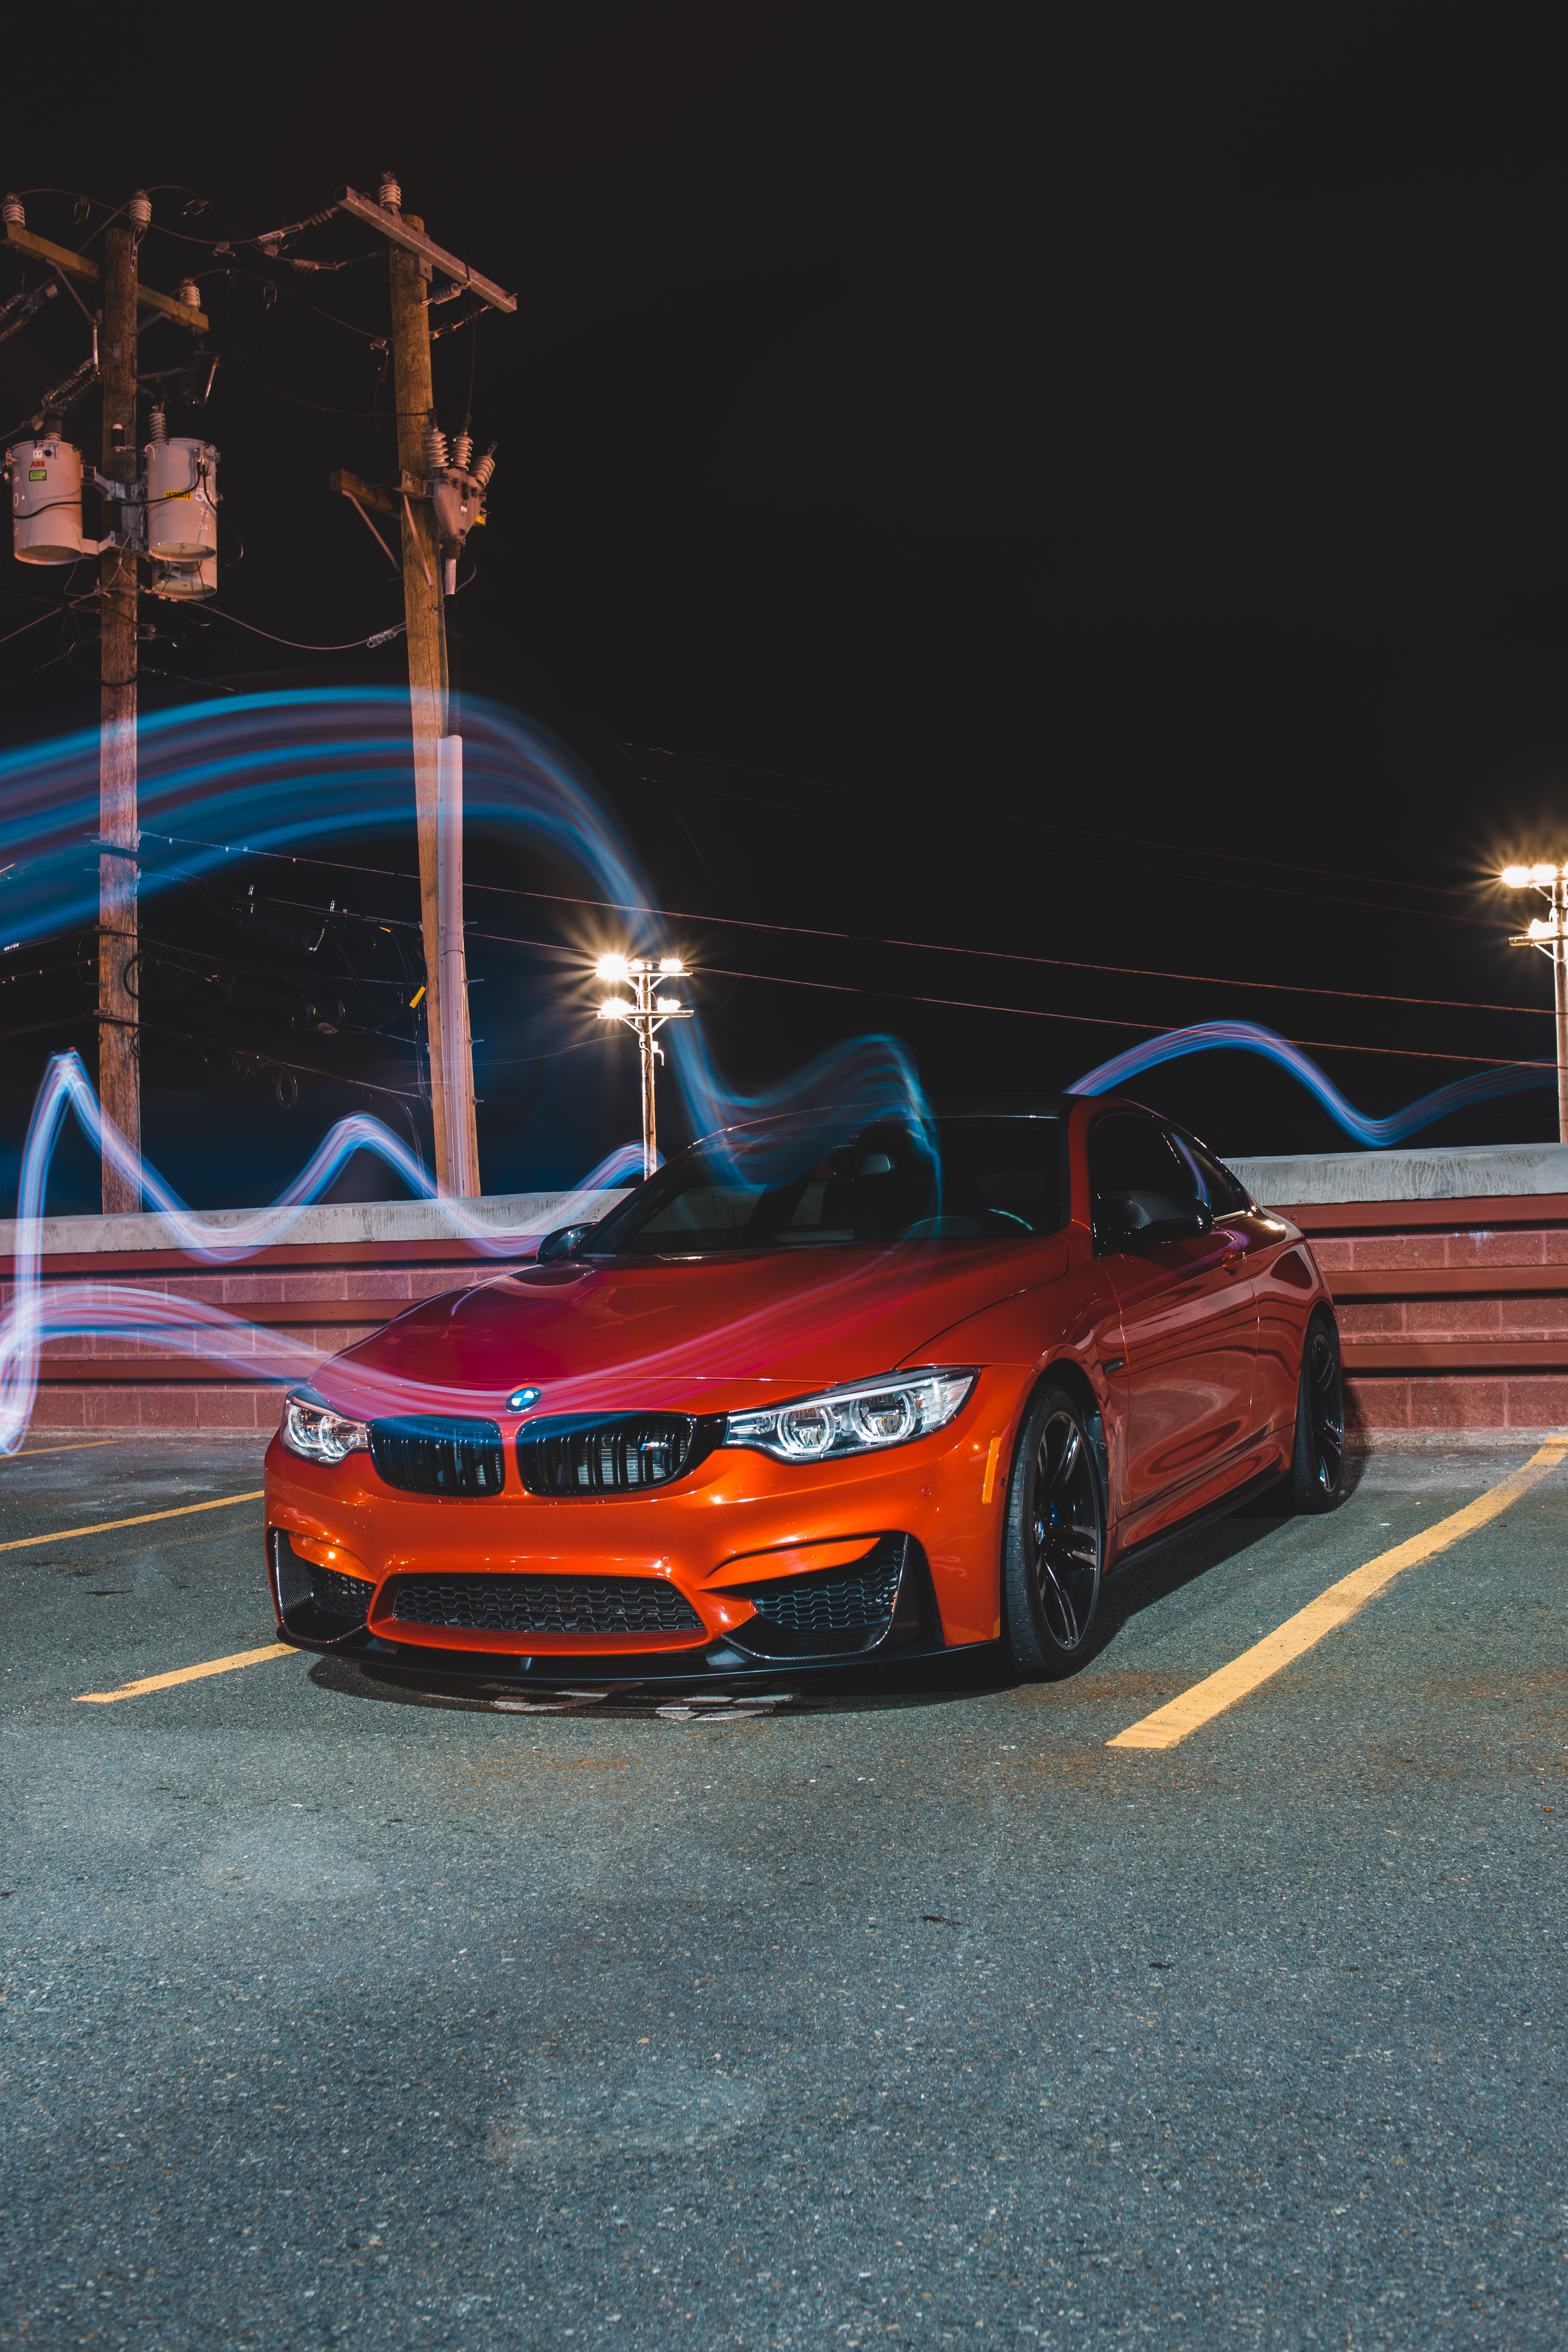 bmw m4, front view, cars, bmw, sports, red, car, sports car